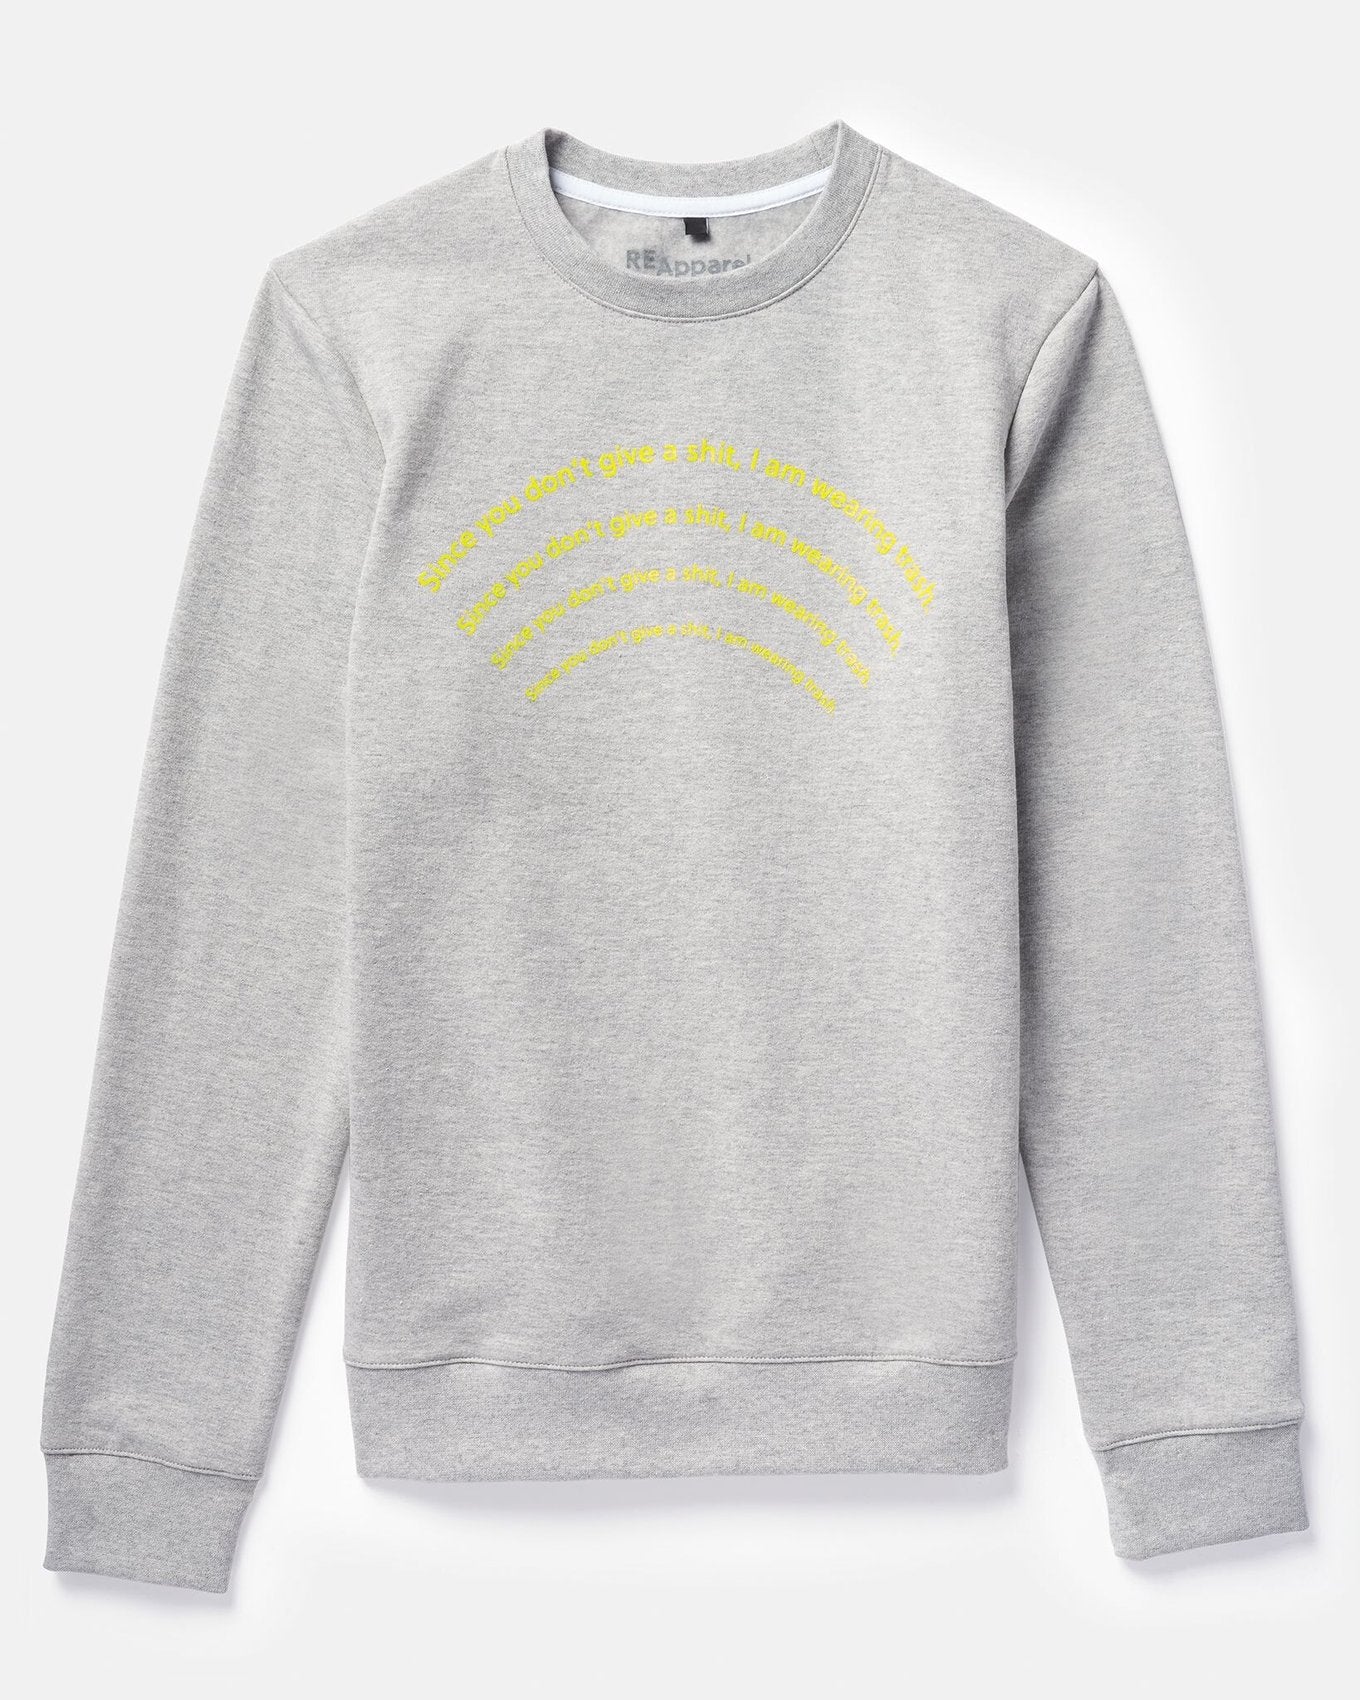 ReApparel Trash Crew Neck . in color Medium Heather Grey and shape long sleeve